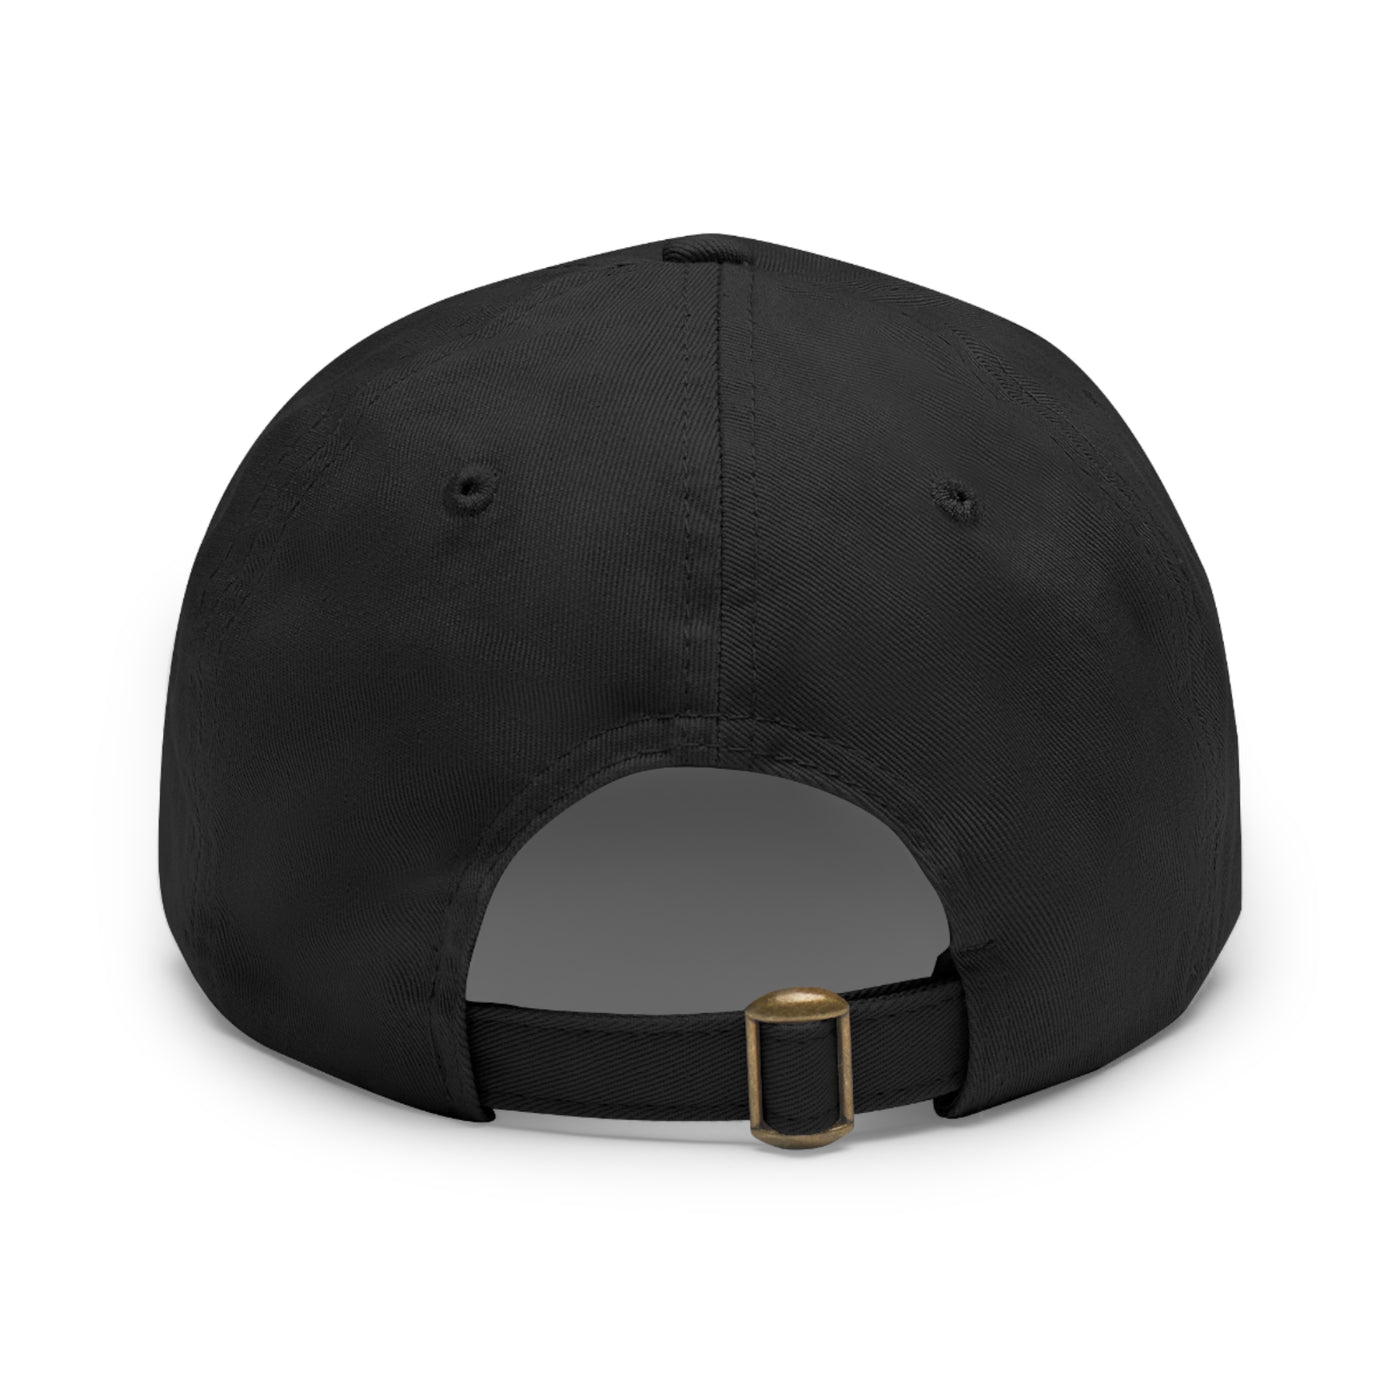 LGG Dad Hat w/ Leather Patch